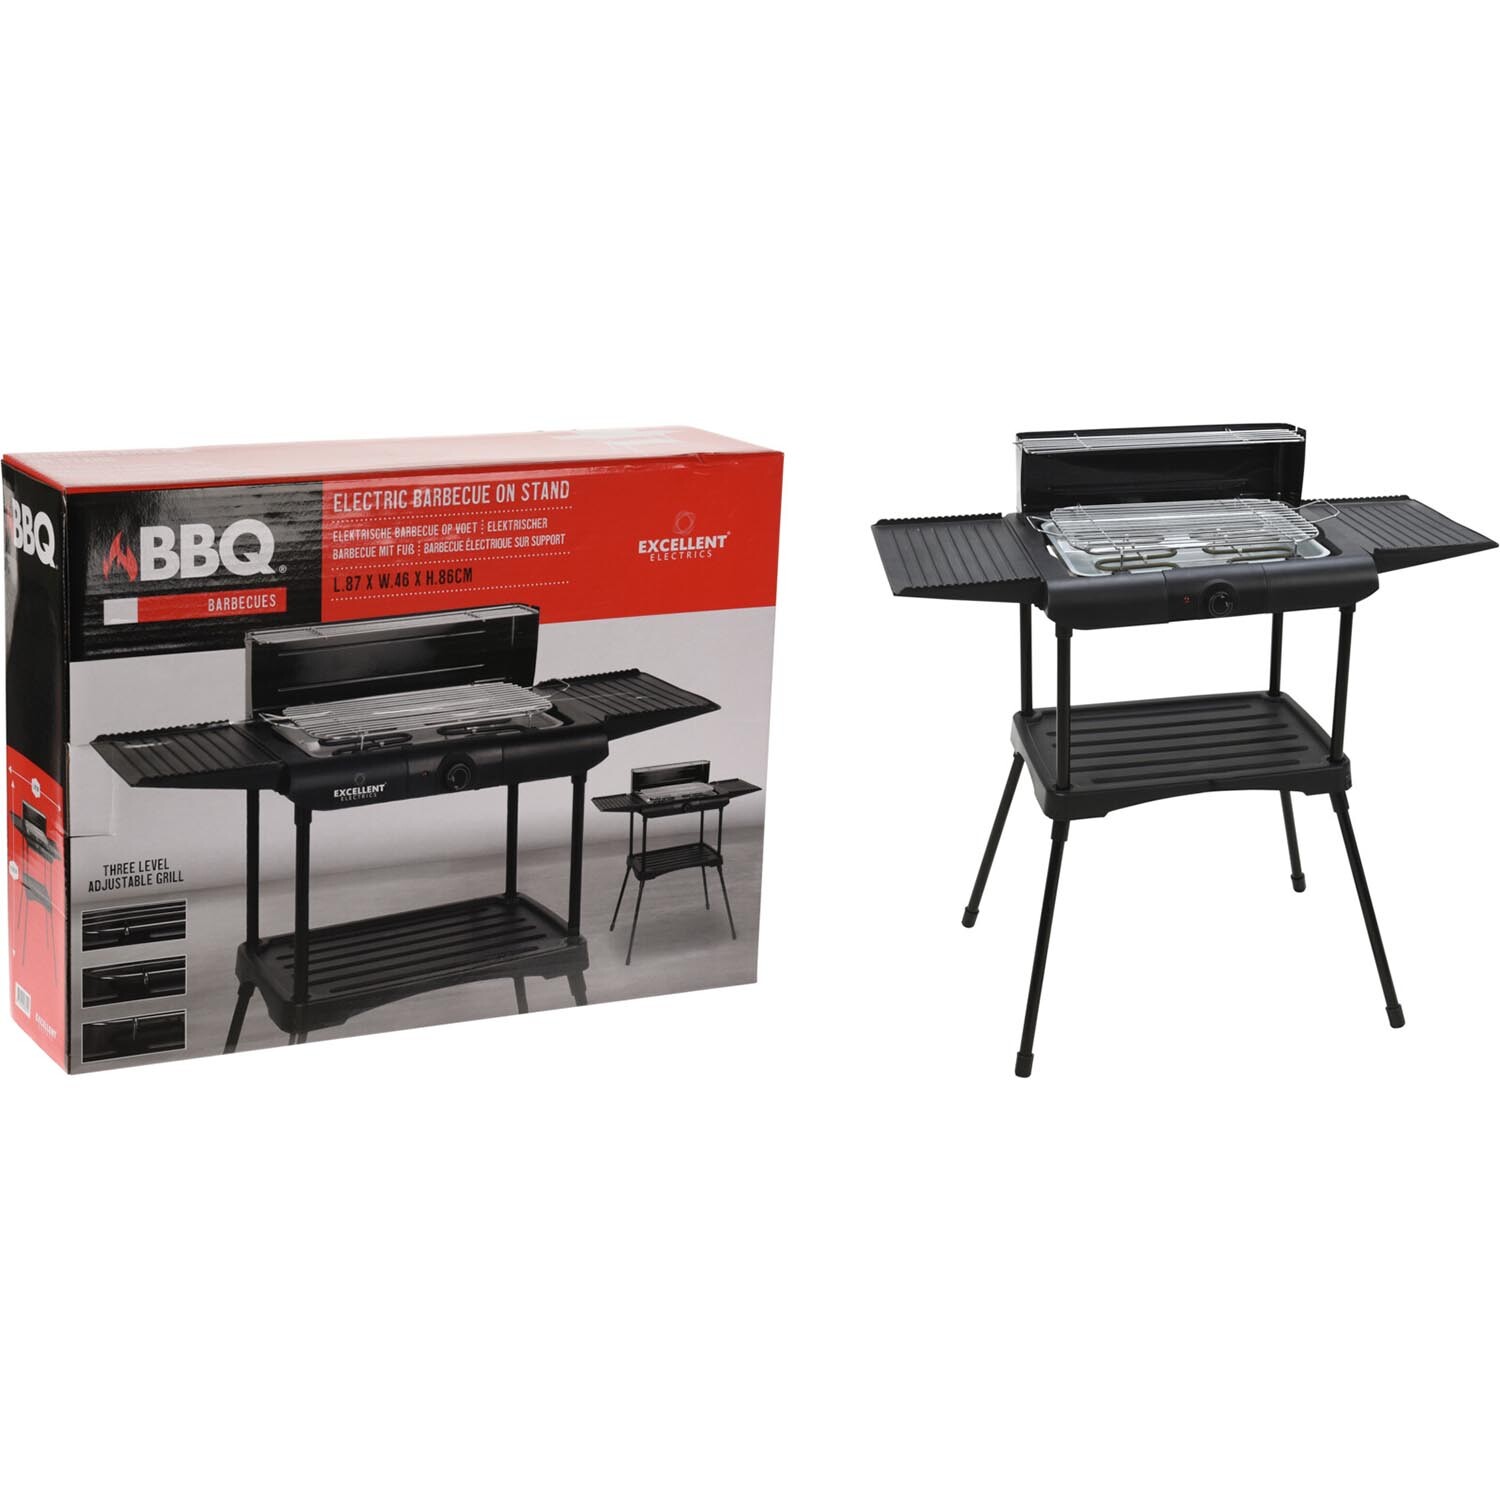 Electric BBQ Standing Model Image